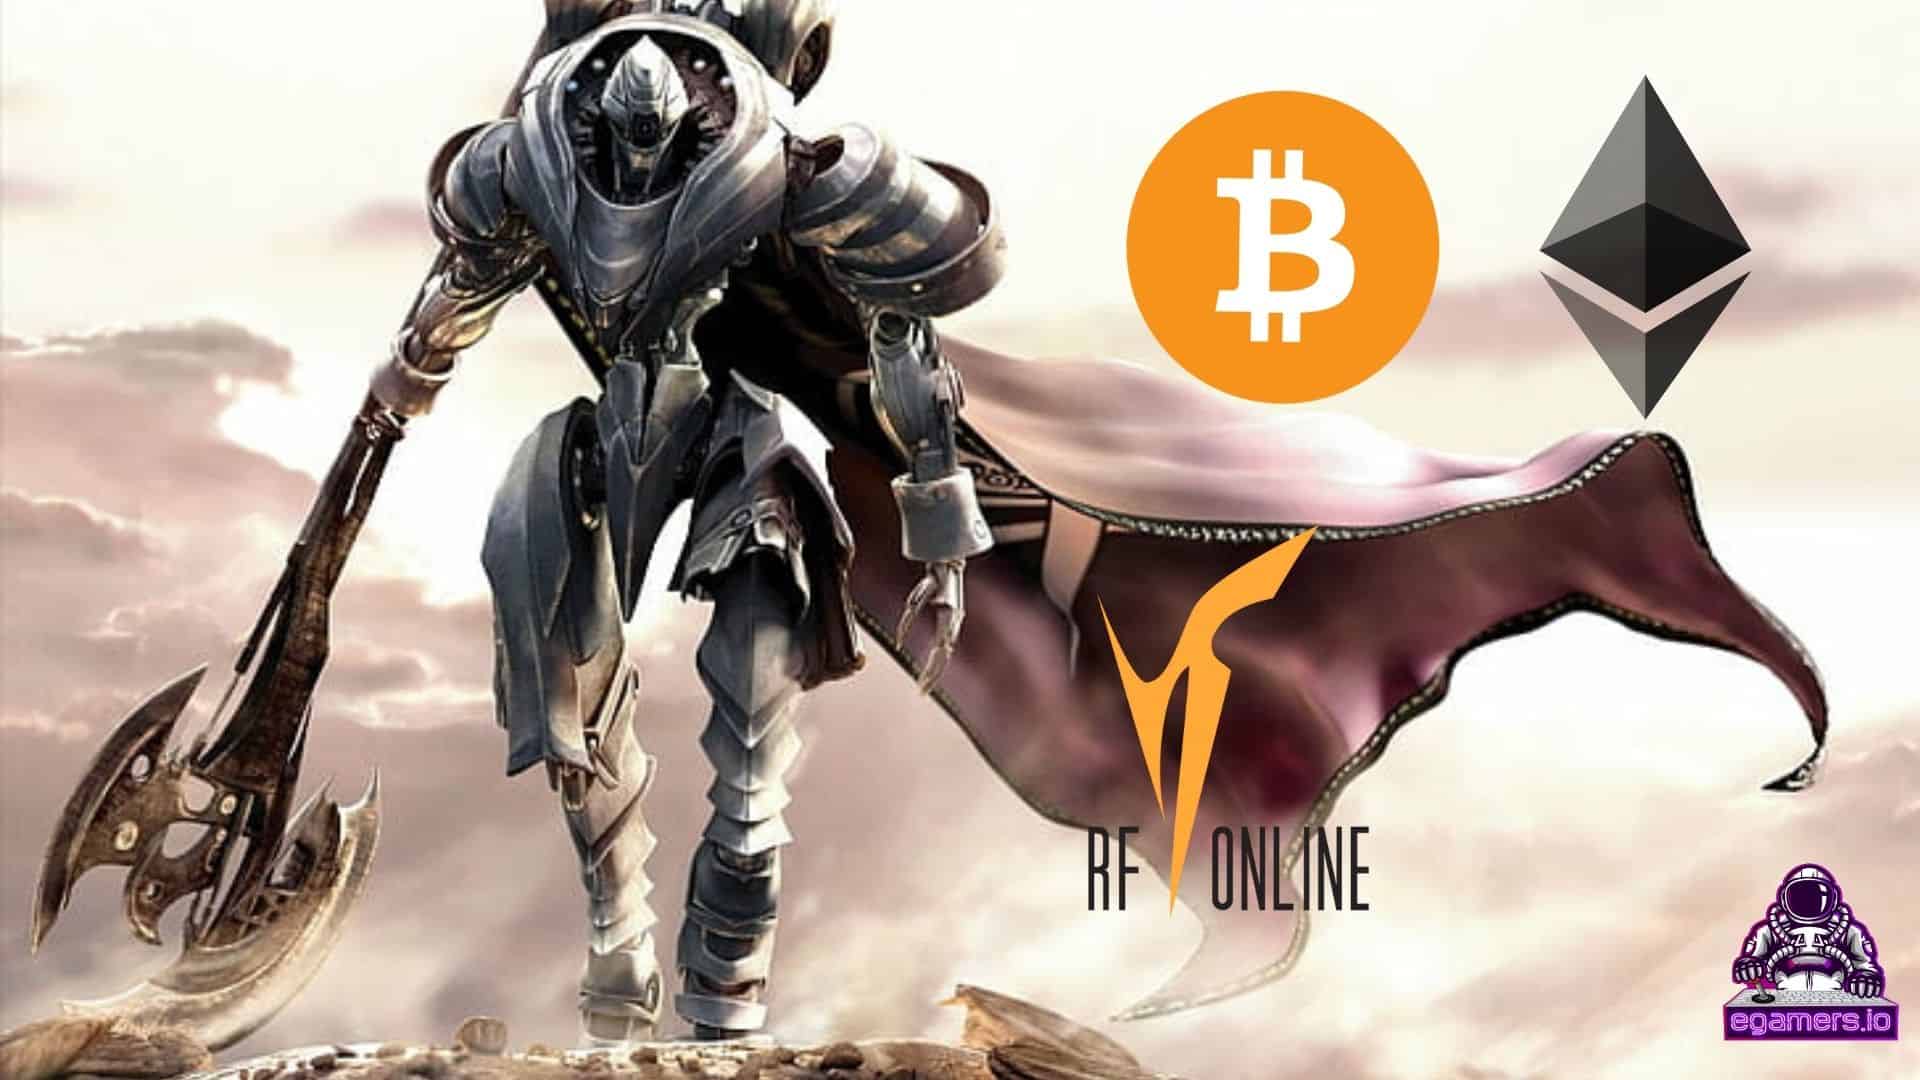 rf online An old classic PC game is about to revive thanks to cryptocurrency.